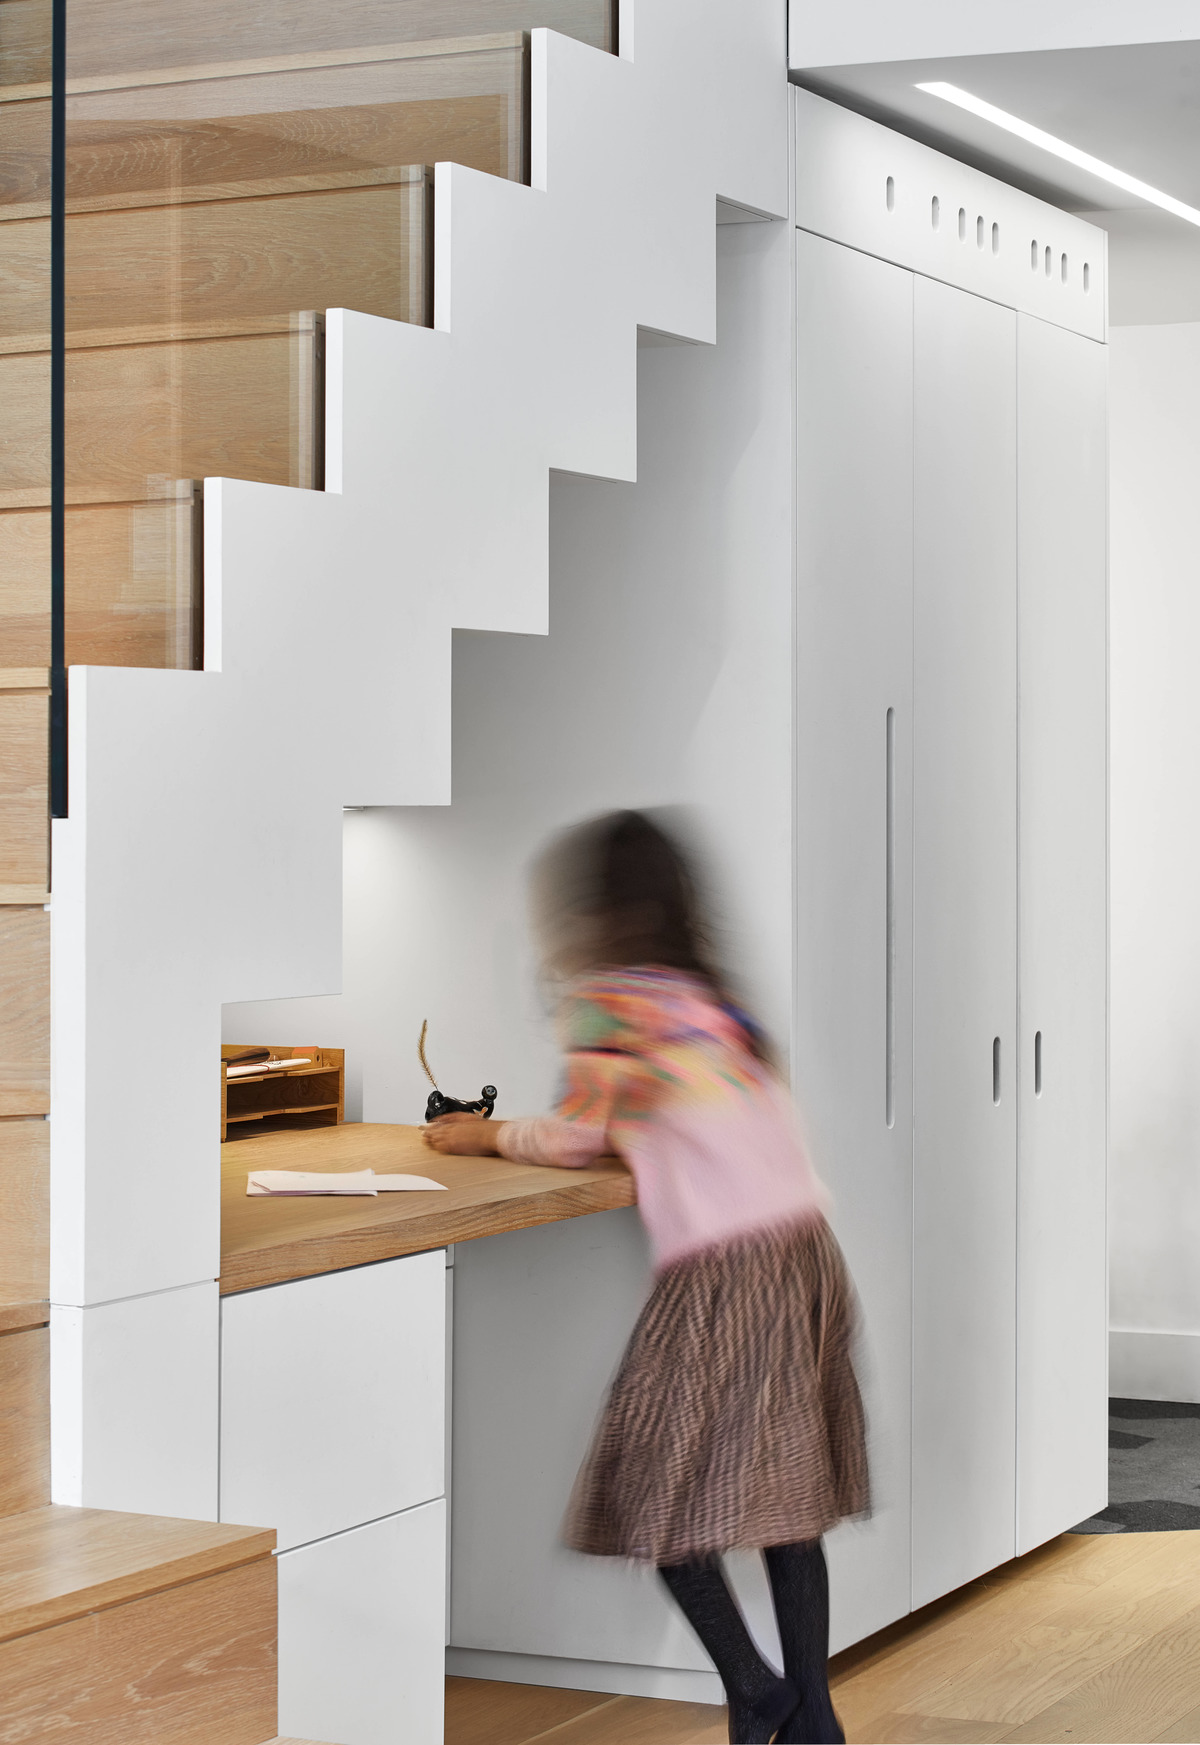 A built-in desk has been included underneath the stairs in a modern loft apartment.